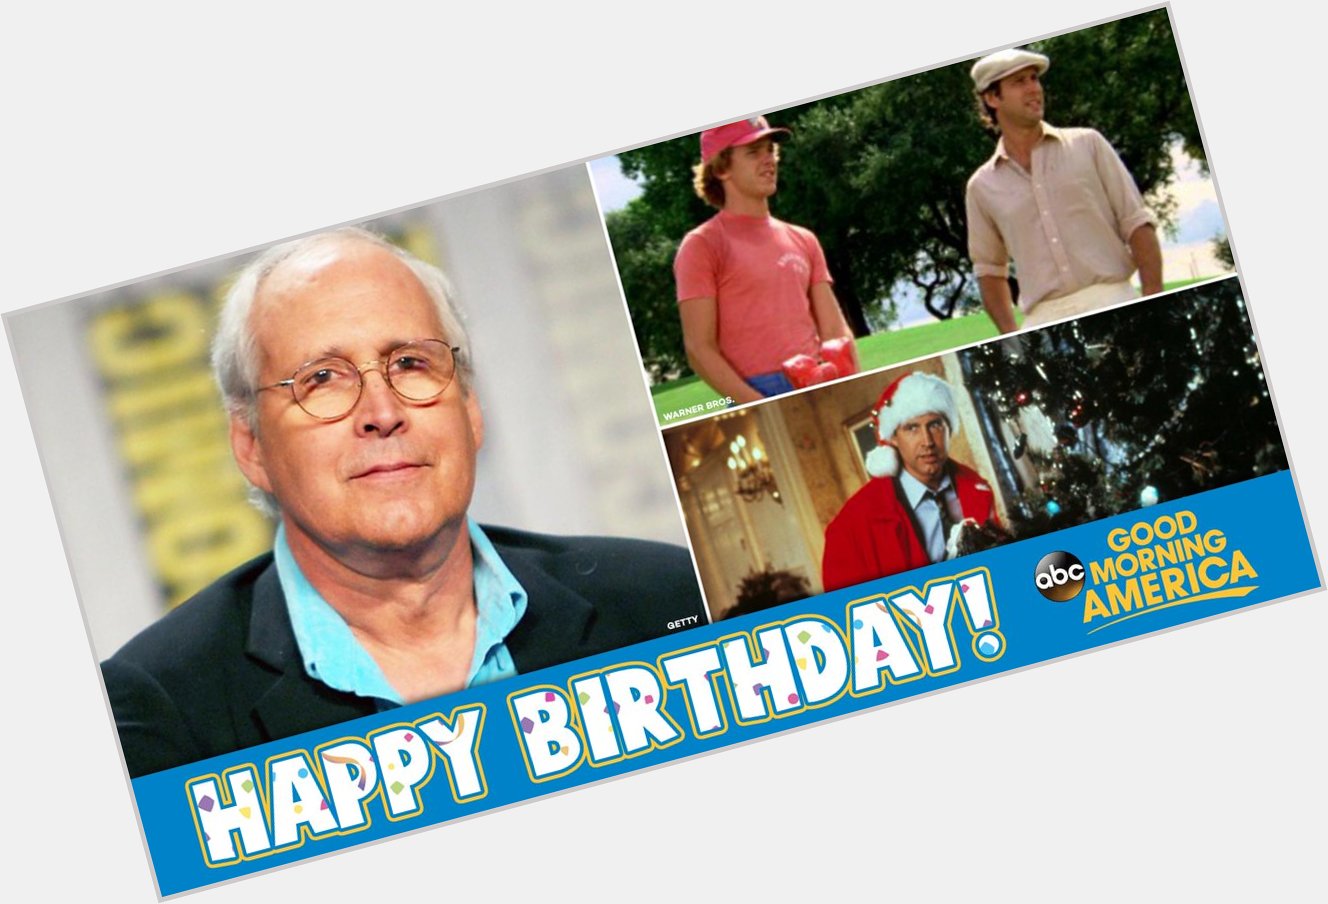 Happy Birthday to a true comedy legend: Chevy Chase!  What is your favorite Chevy Chase movie? 